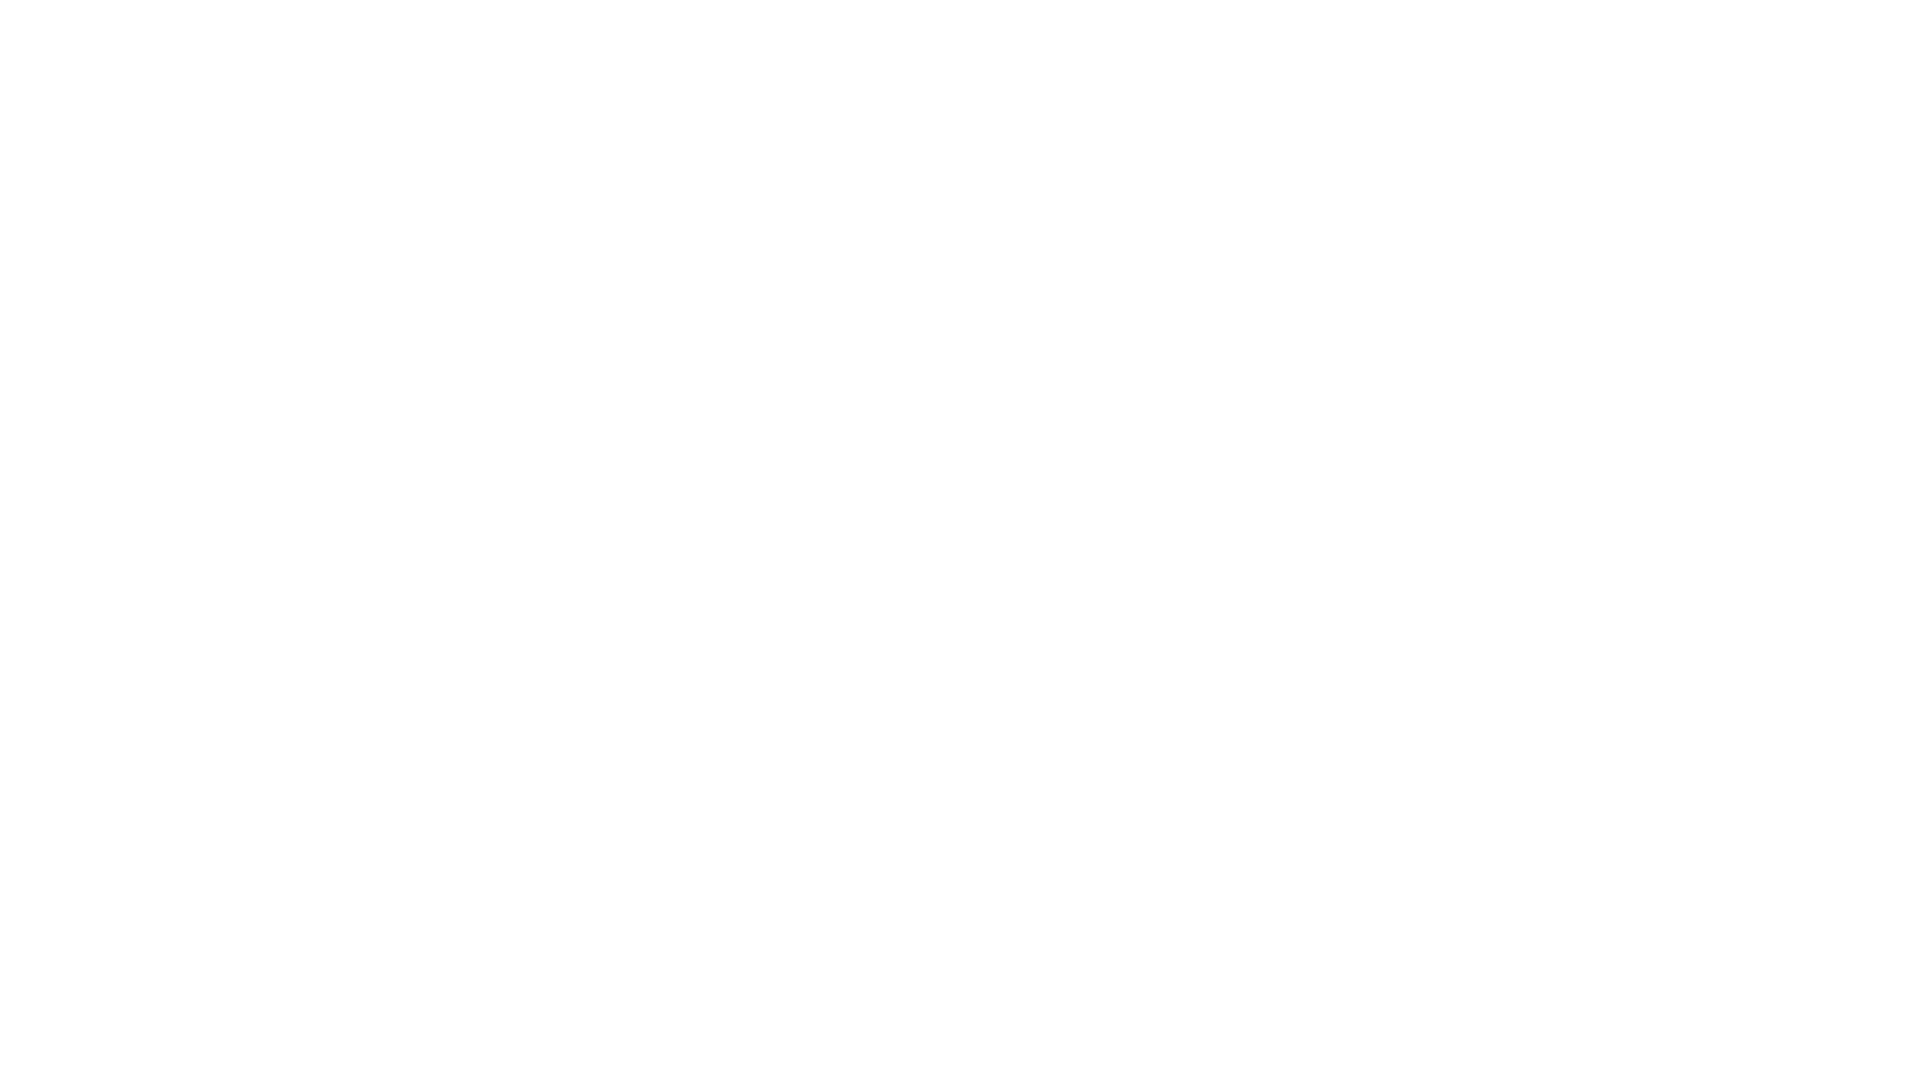 Missing Picture